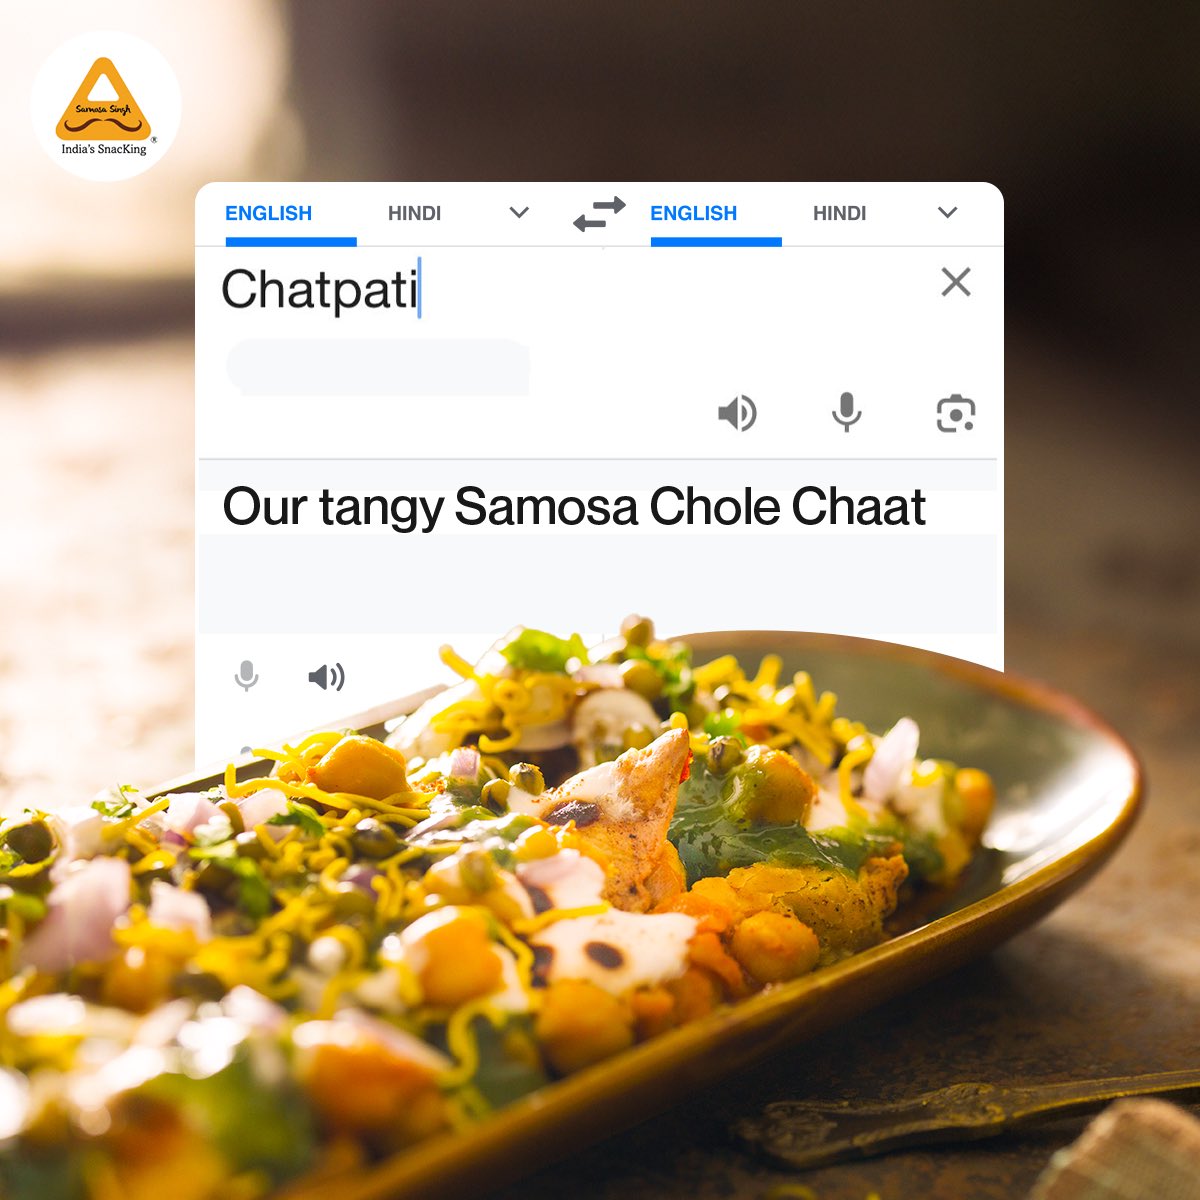 We have 100% chatpati Samosa Chole Chaat, and it will surely make your taste buds happy! Order from the link in bio!

#foodstagram #snacks #streetfoodindia #indiansnacks #samosasingh #indiasnacking #samosasingh_in #snackingmatlabsamosasingh #snacking